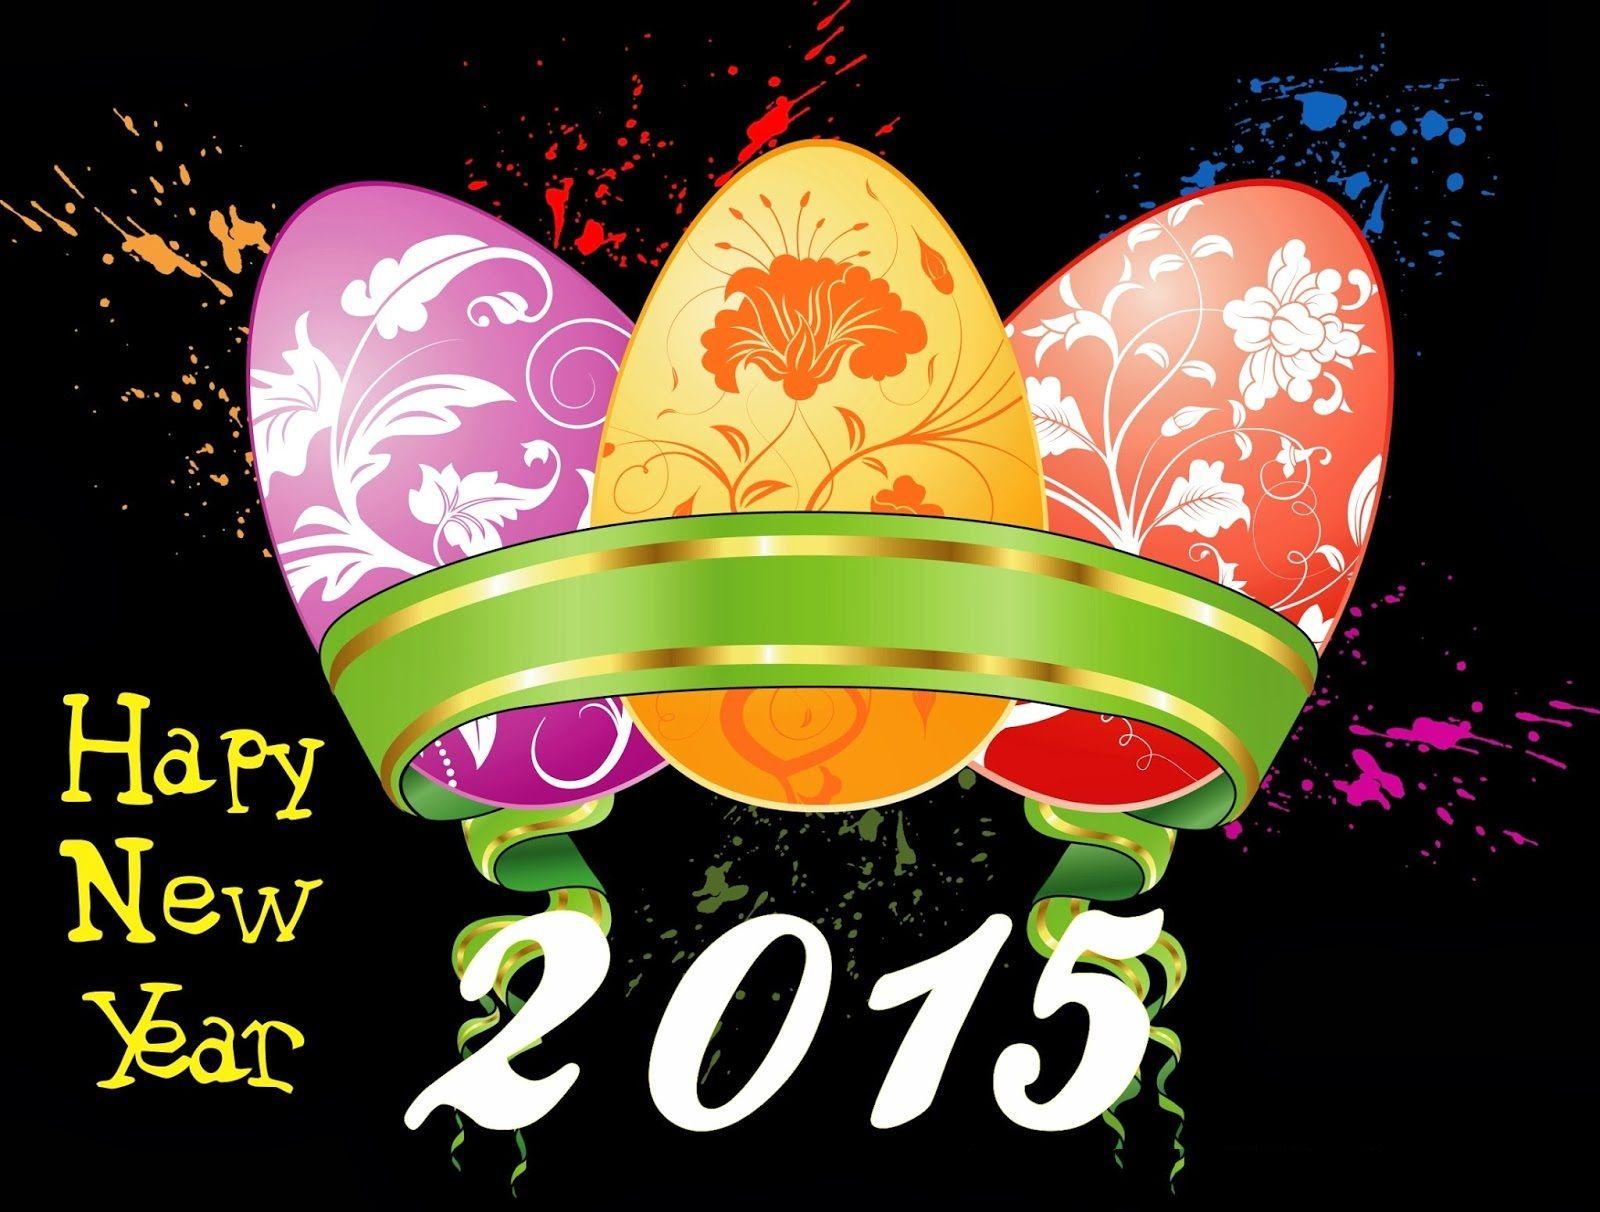 Happy New Year 2015 HD Wallpaper. Picture Google. Best Image. HD